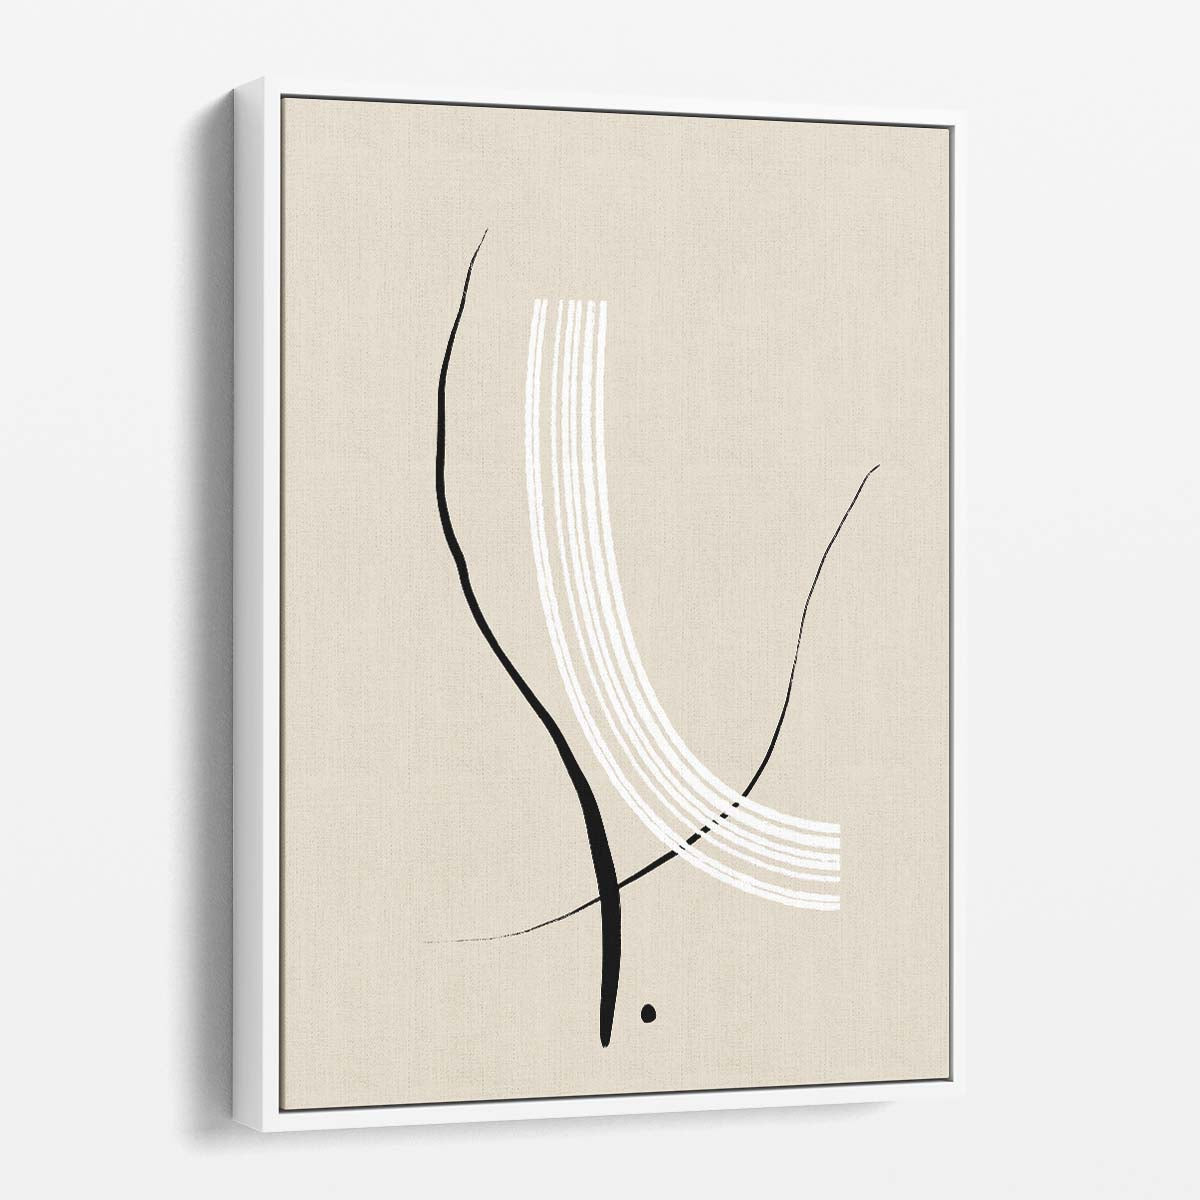 Beige Abstract Shapes Illustration Wall Art by Uplusmestudio by Luxuriance Designs, made in USA